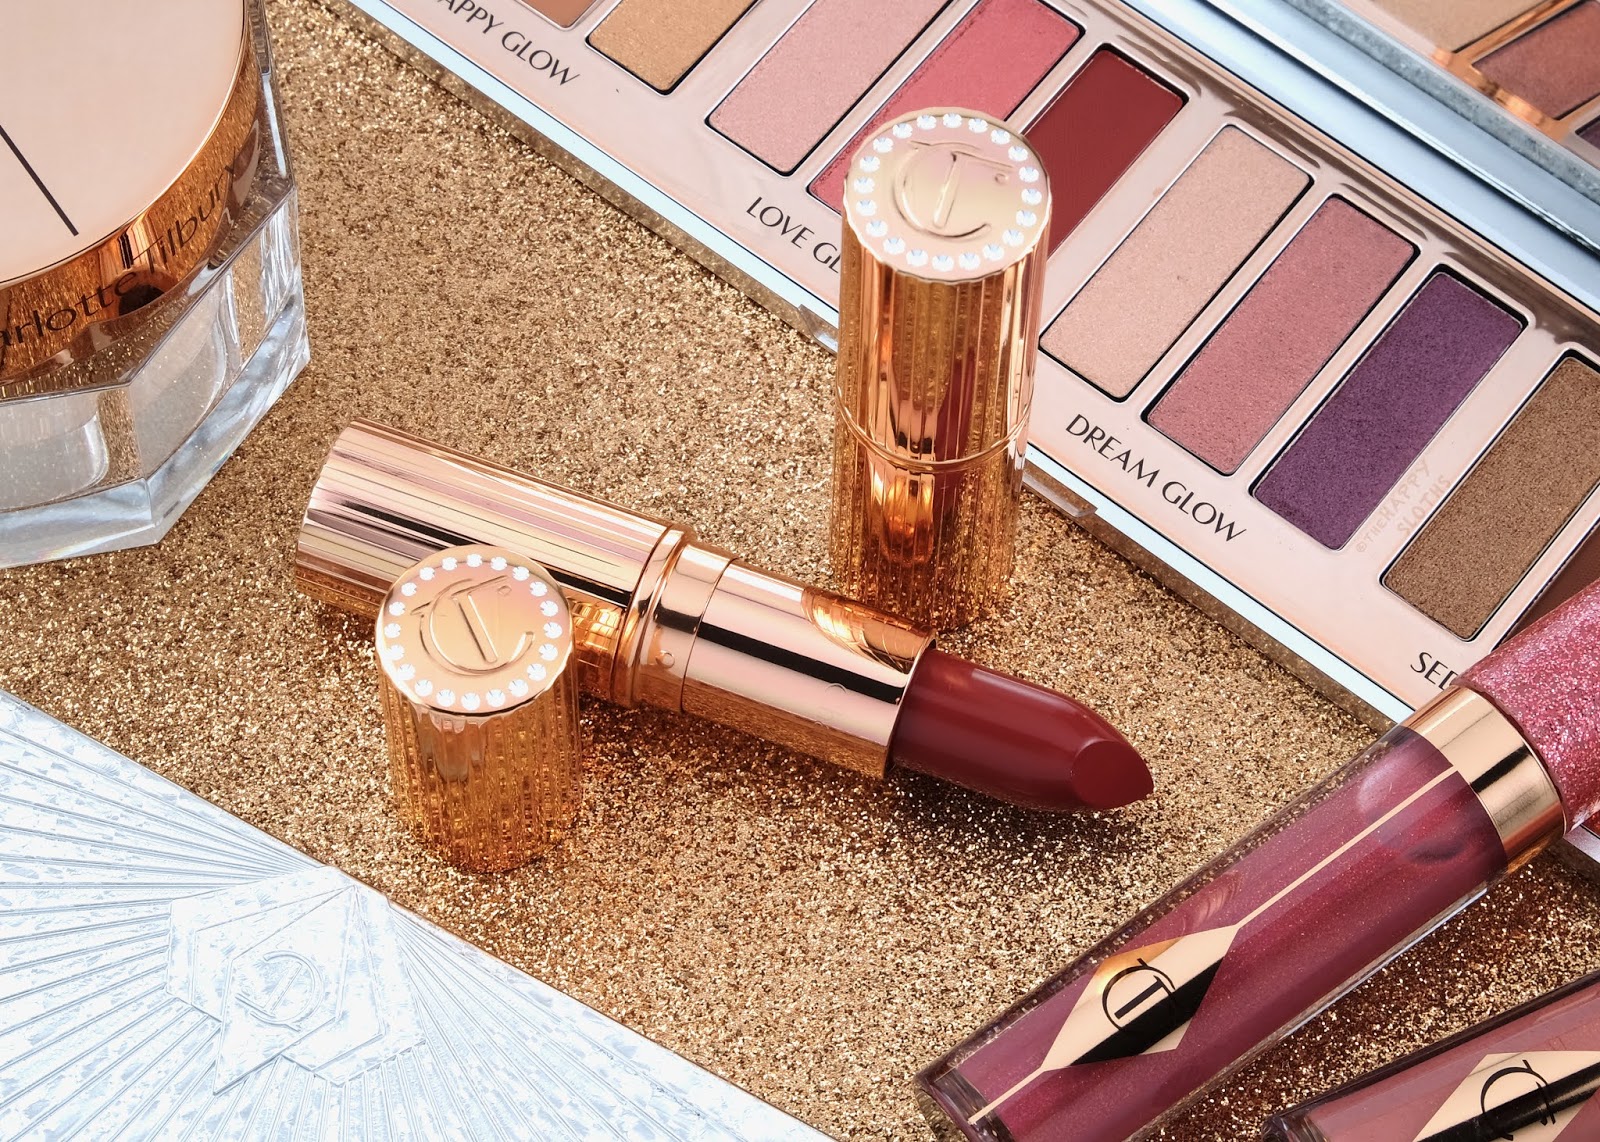 Charlotte Tilbury | Holiday 2020 K.I.S.S.I.N.G Lipstick in "Super Starlet": Review and Swatches